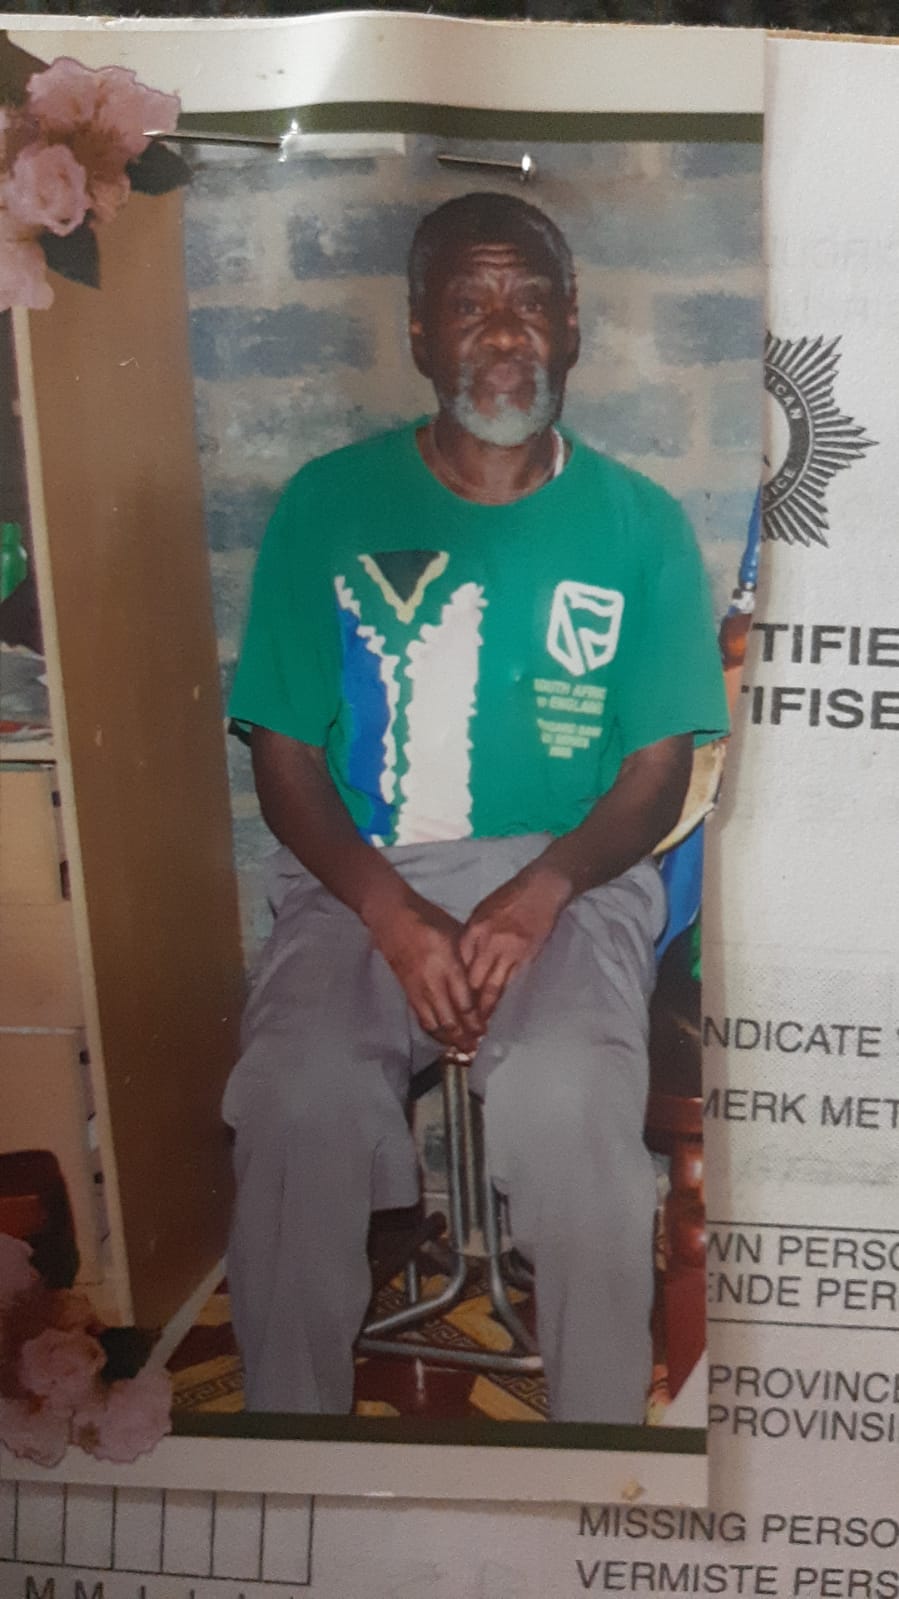 The police in Jericho request the community's assistance in locating missing John Gumede